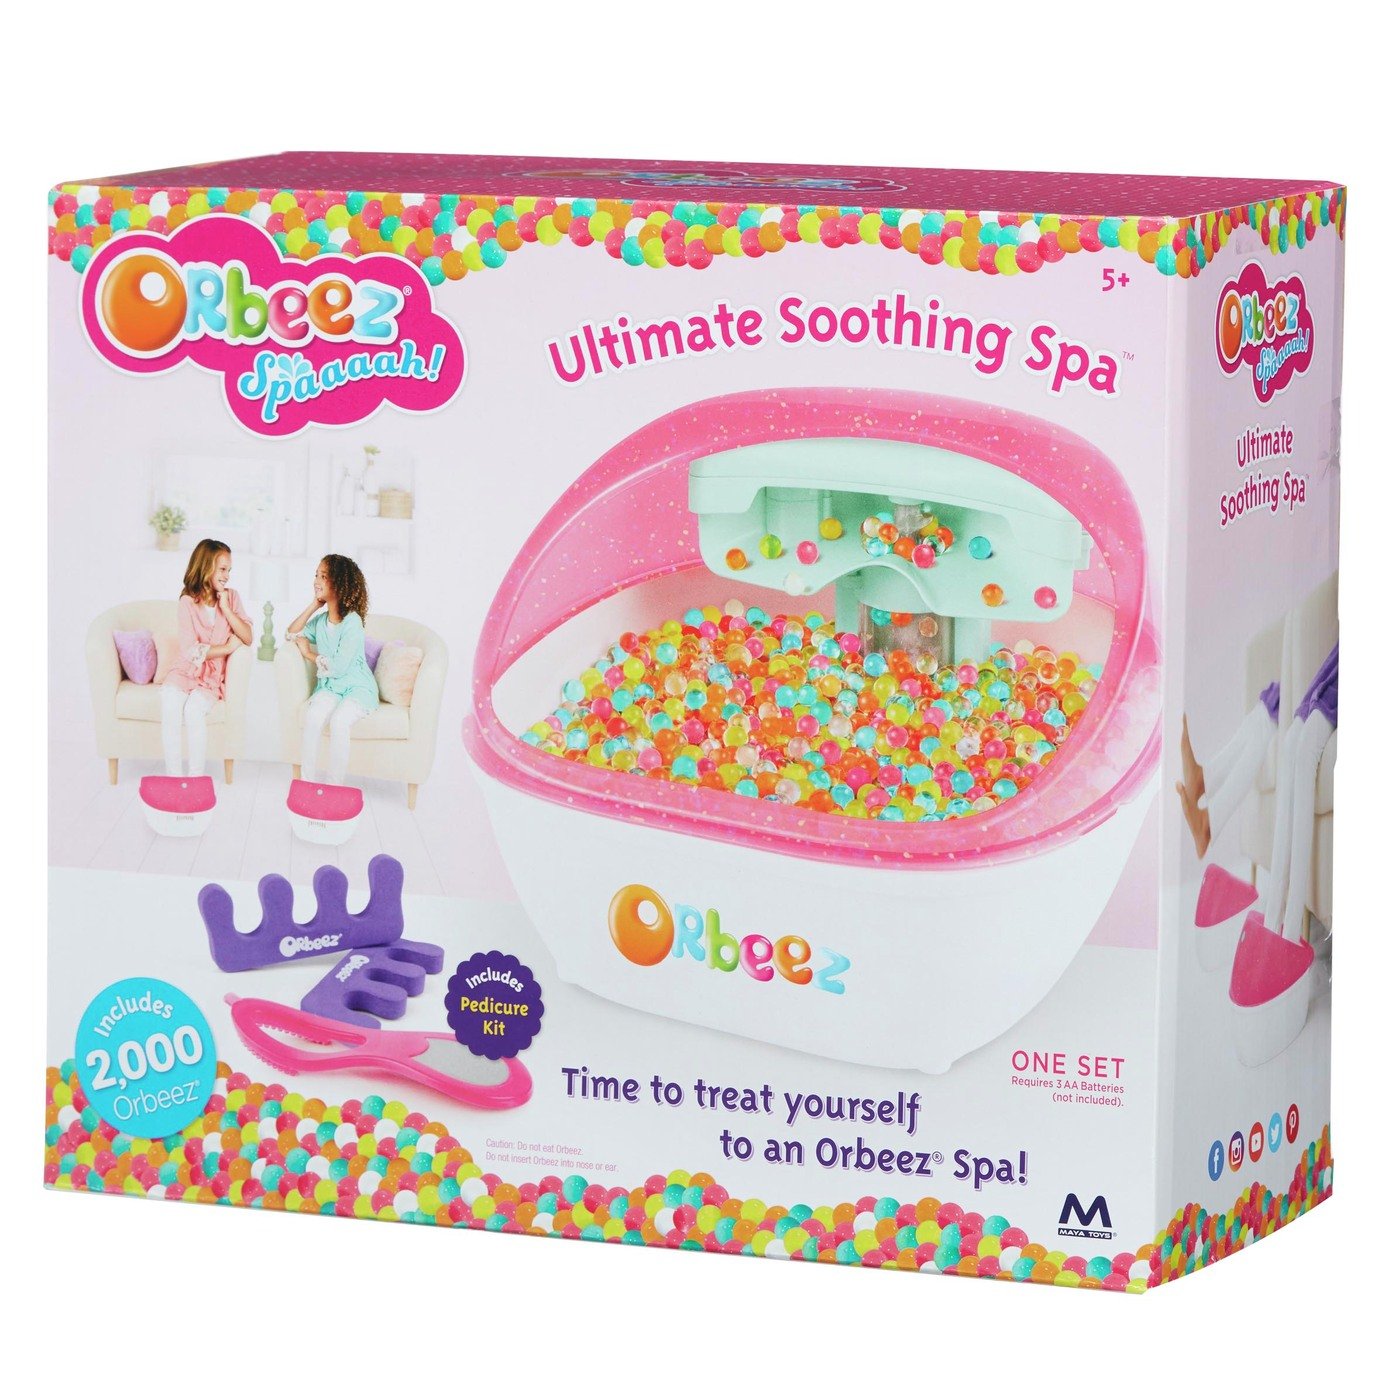 Orbeez Soothing Spa Review